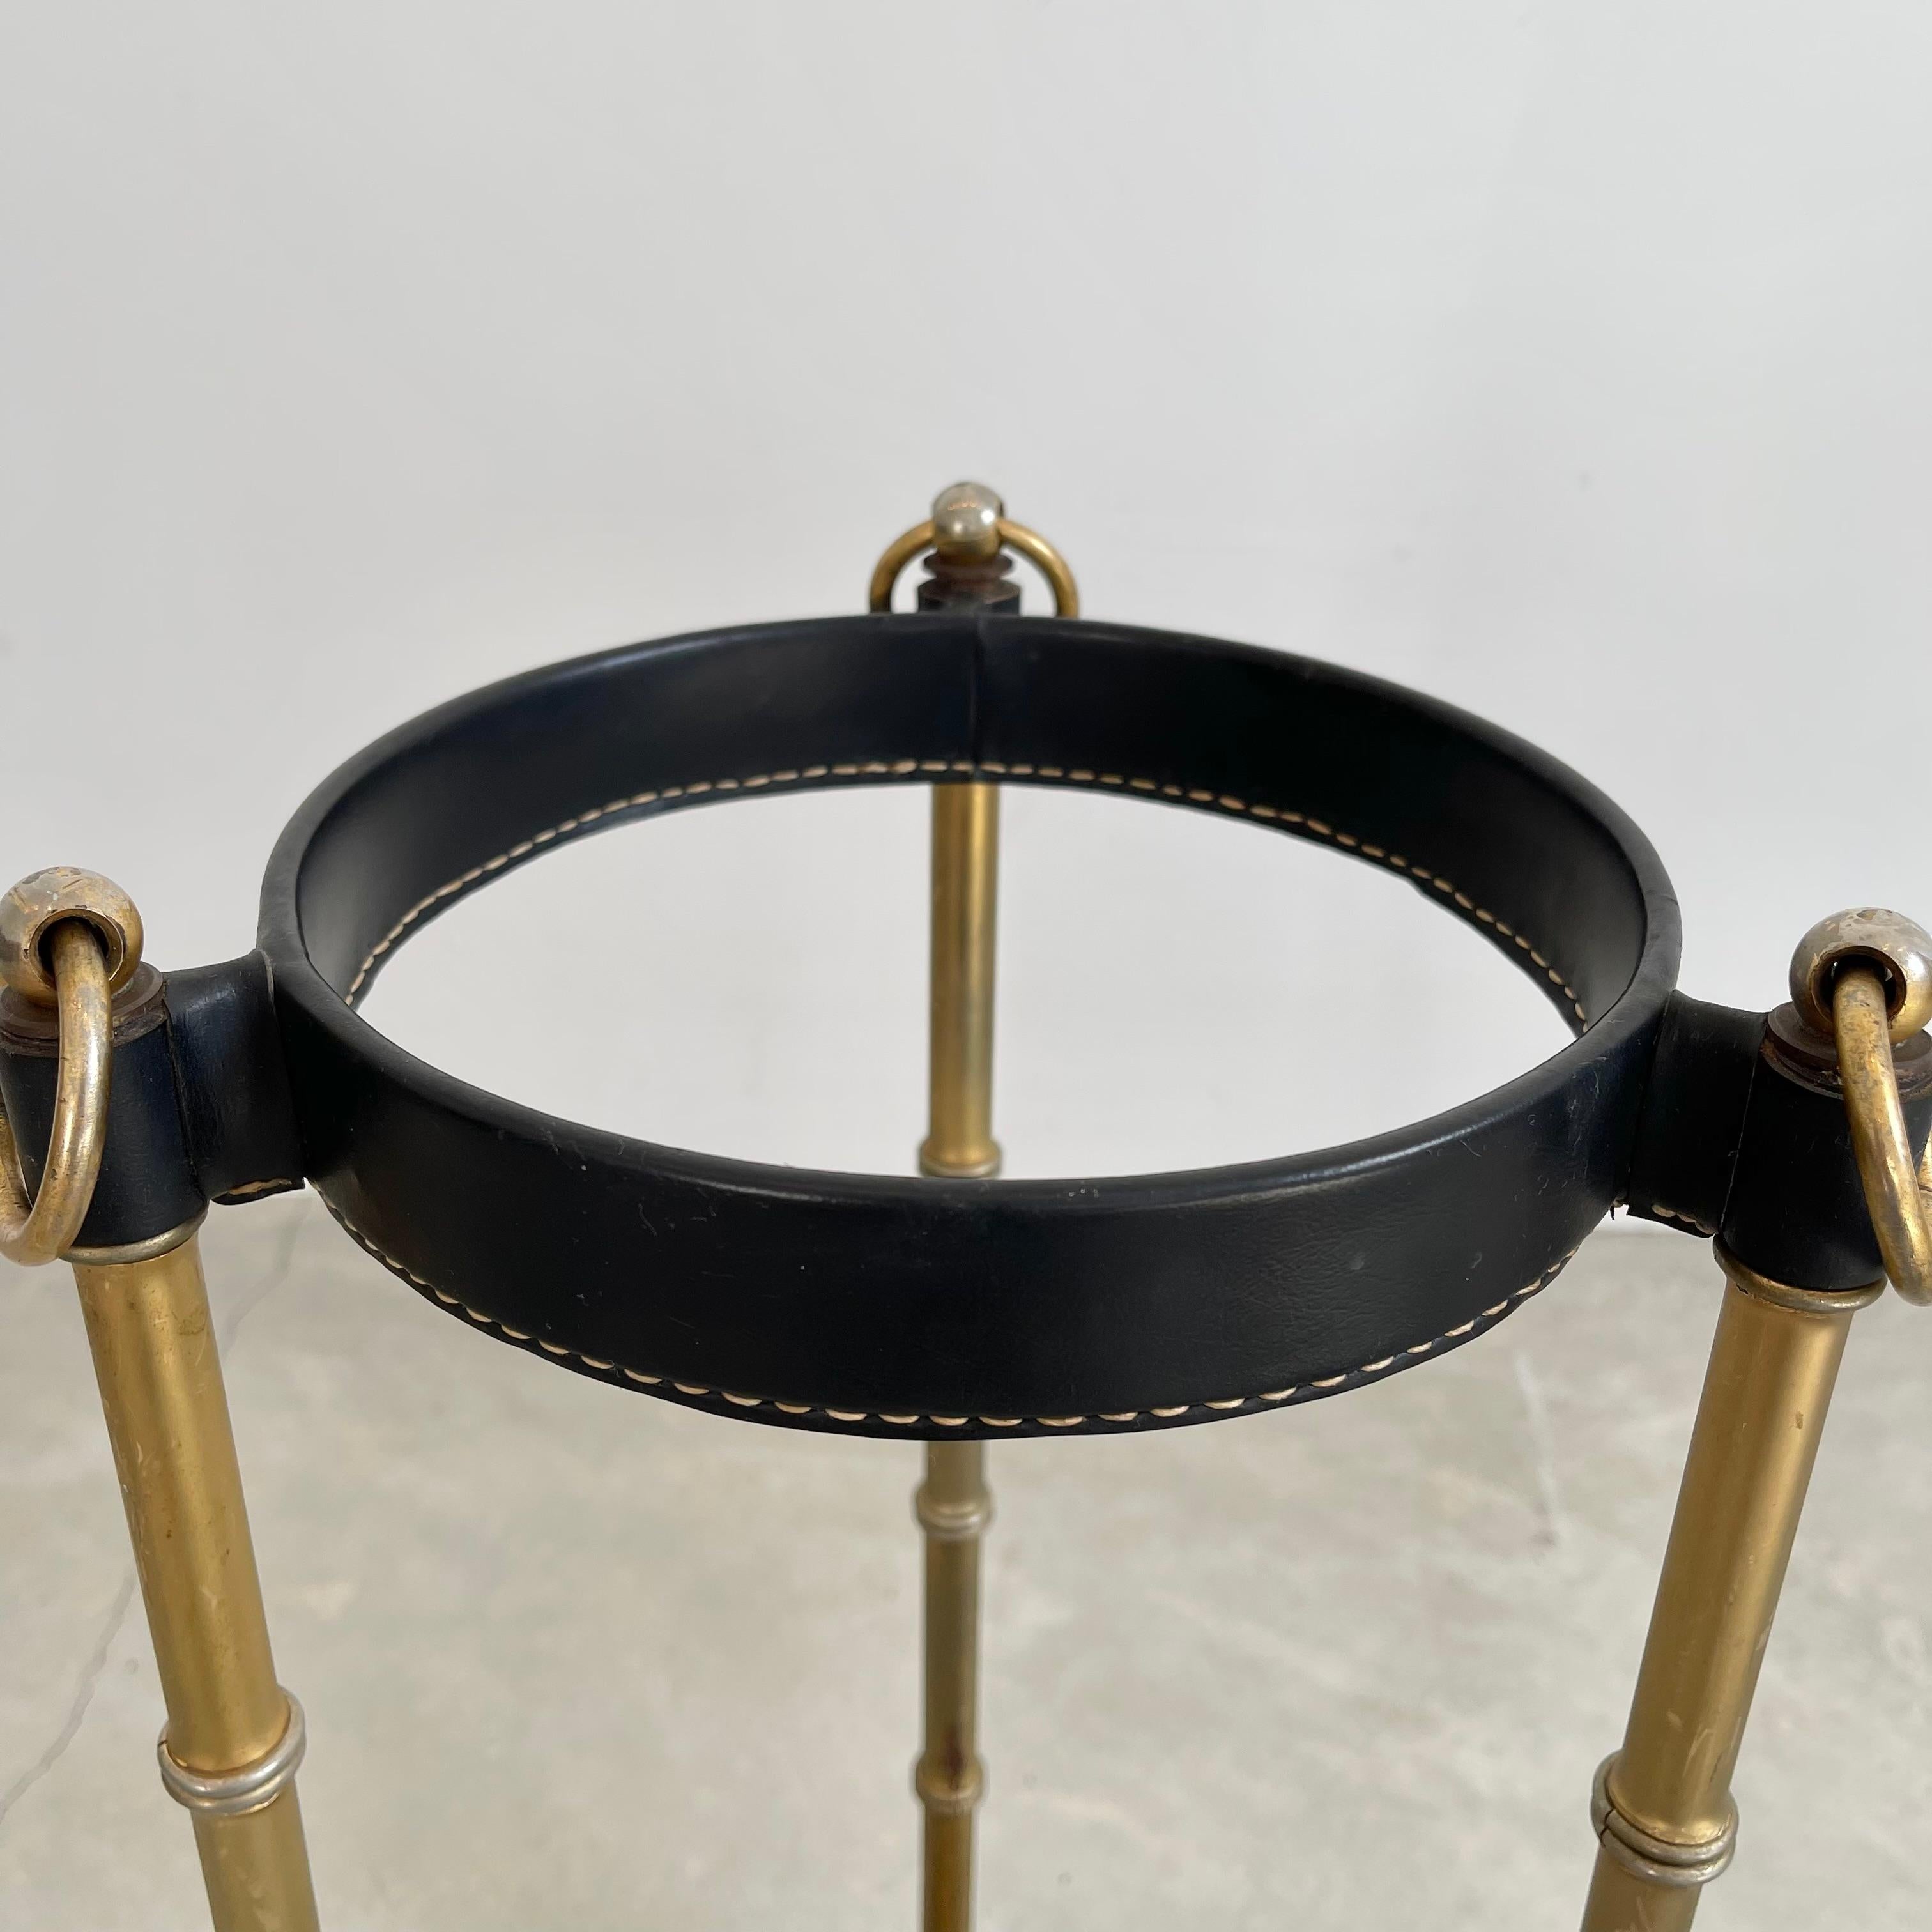 Jacques Adnet Leather and Brass Umbrella Stand, 1950s For Sale 7